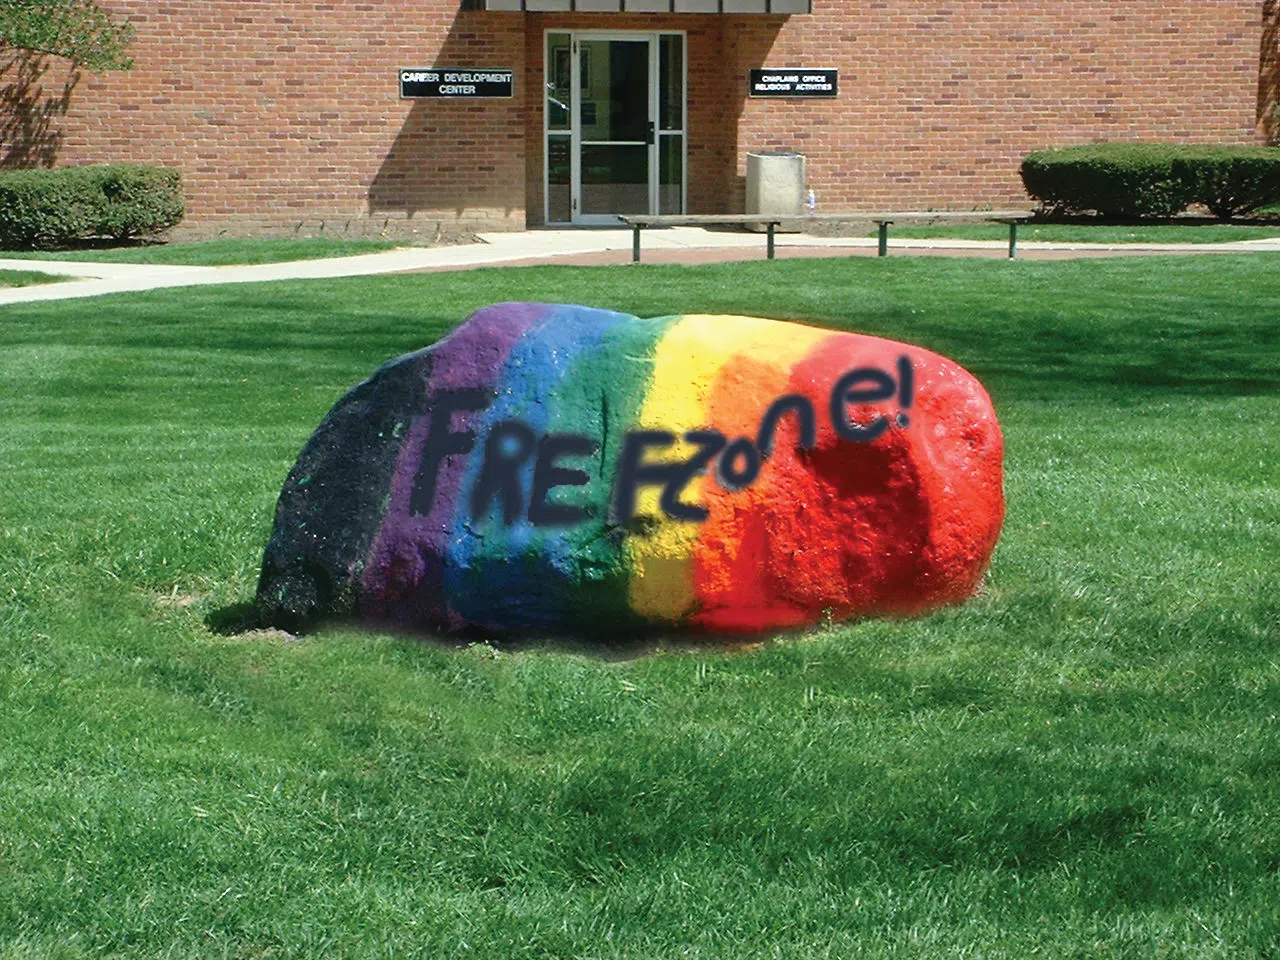 A large rock in front of Hanby Hall is painted in rainbow colors and has "Freezone!" written on it with paint.